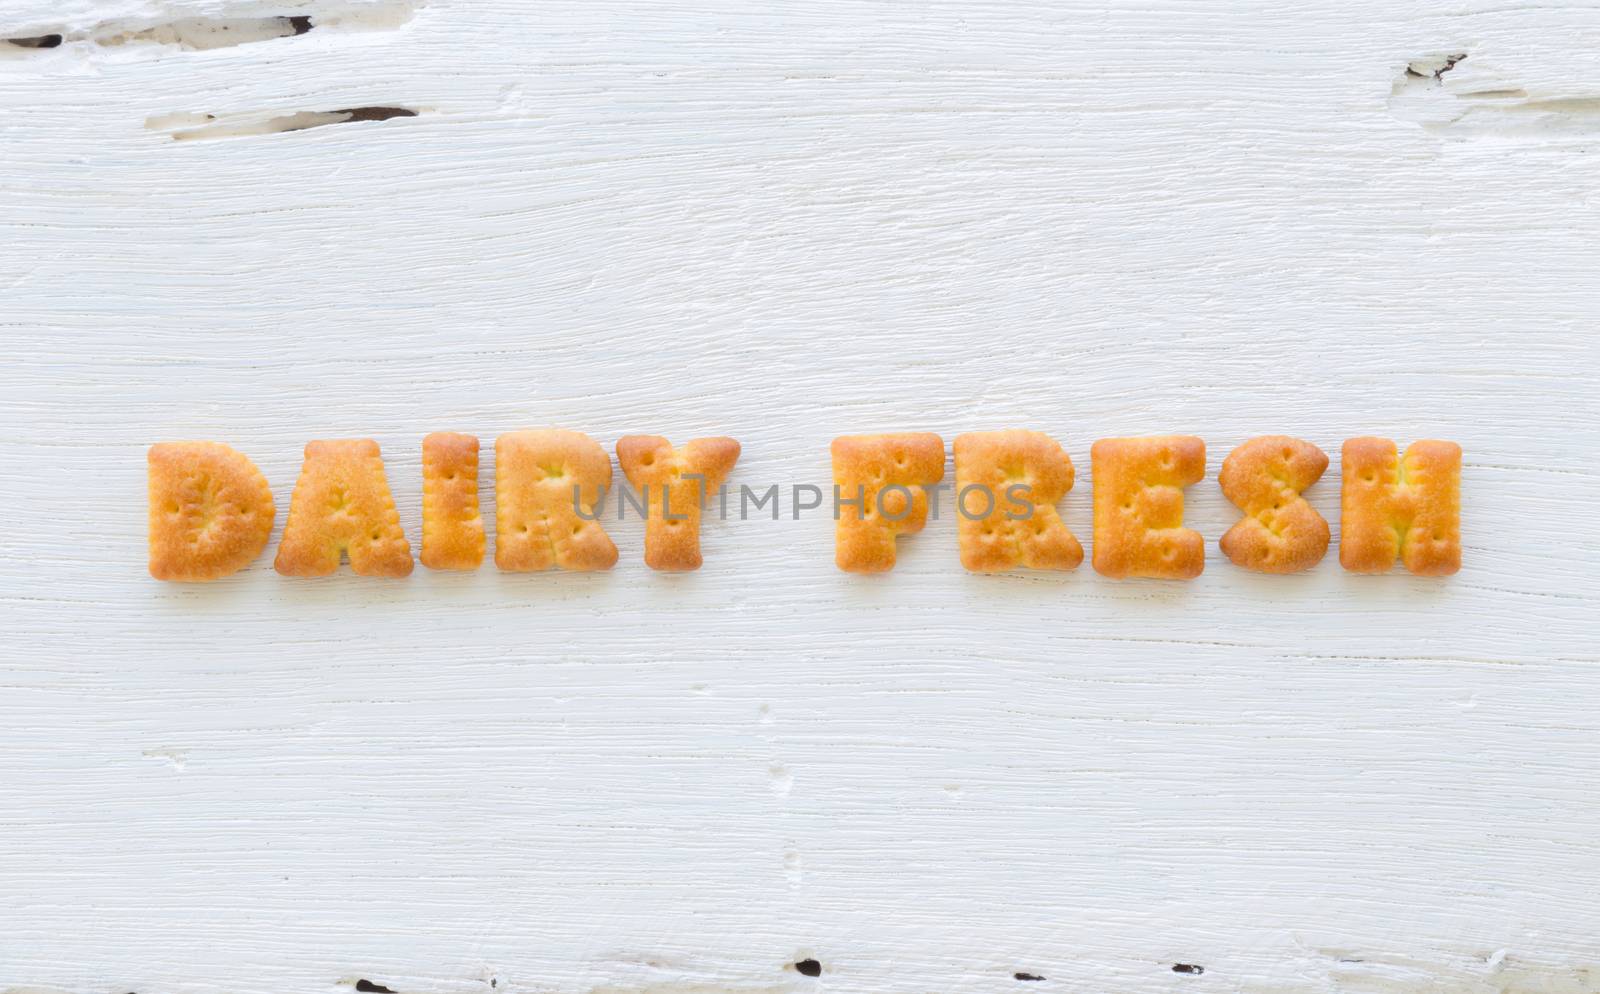 The character word DAIRY FRESH. Alphabet cookie crackers putting on rough surface of white wood background.